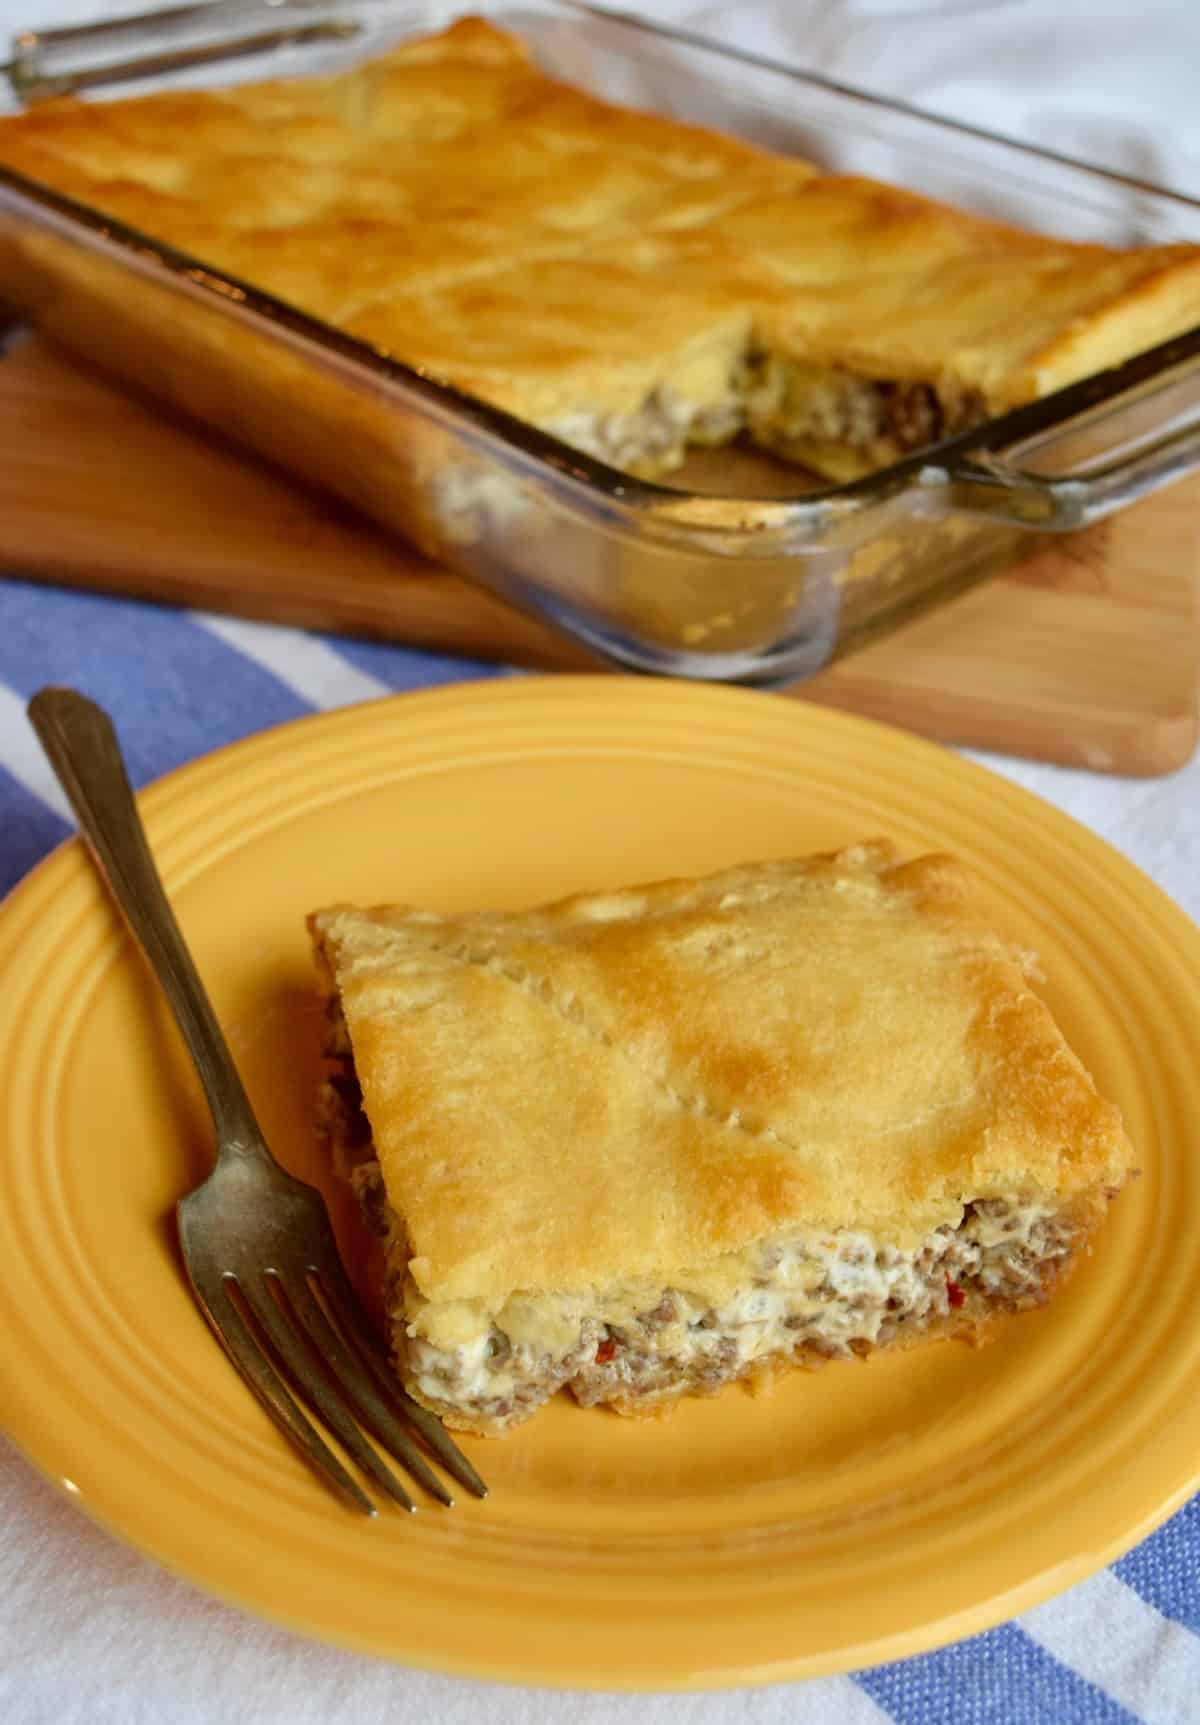 Slice of creamy sausage casserole with a crust on plate with a fork.